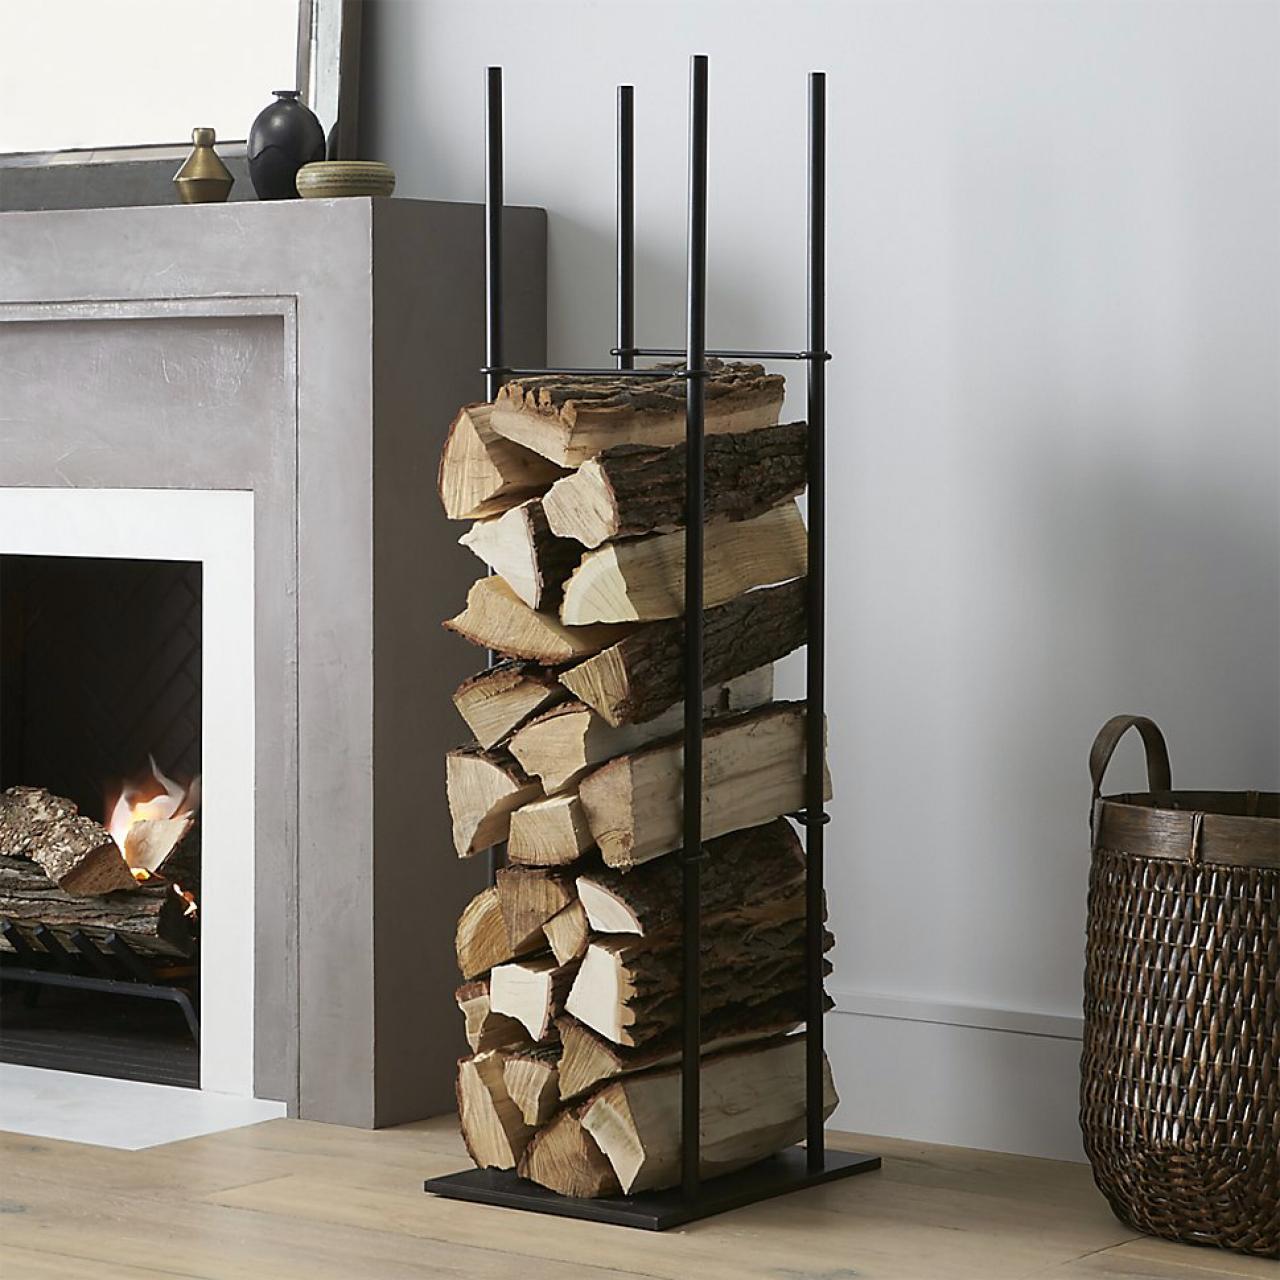 Adunnis Fireplace Accessories